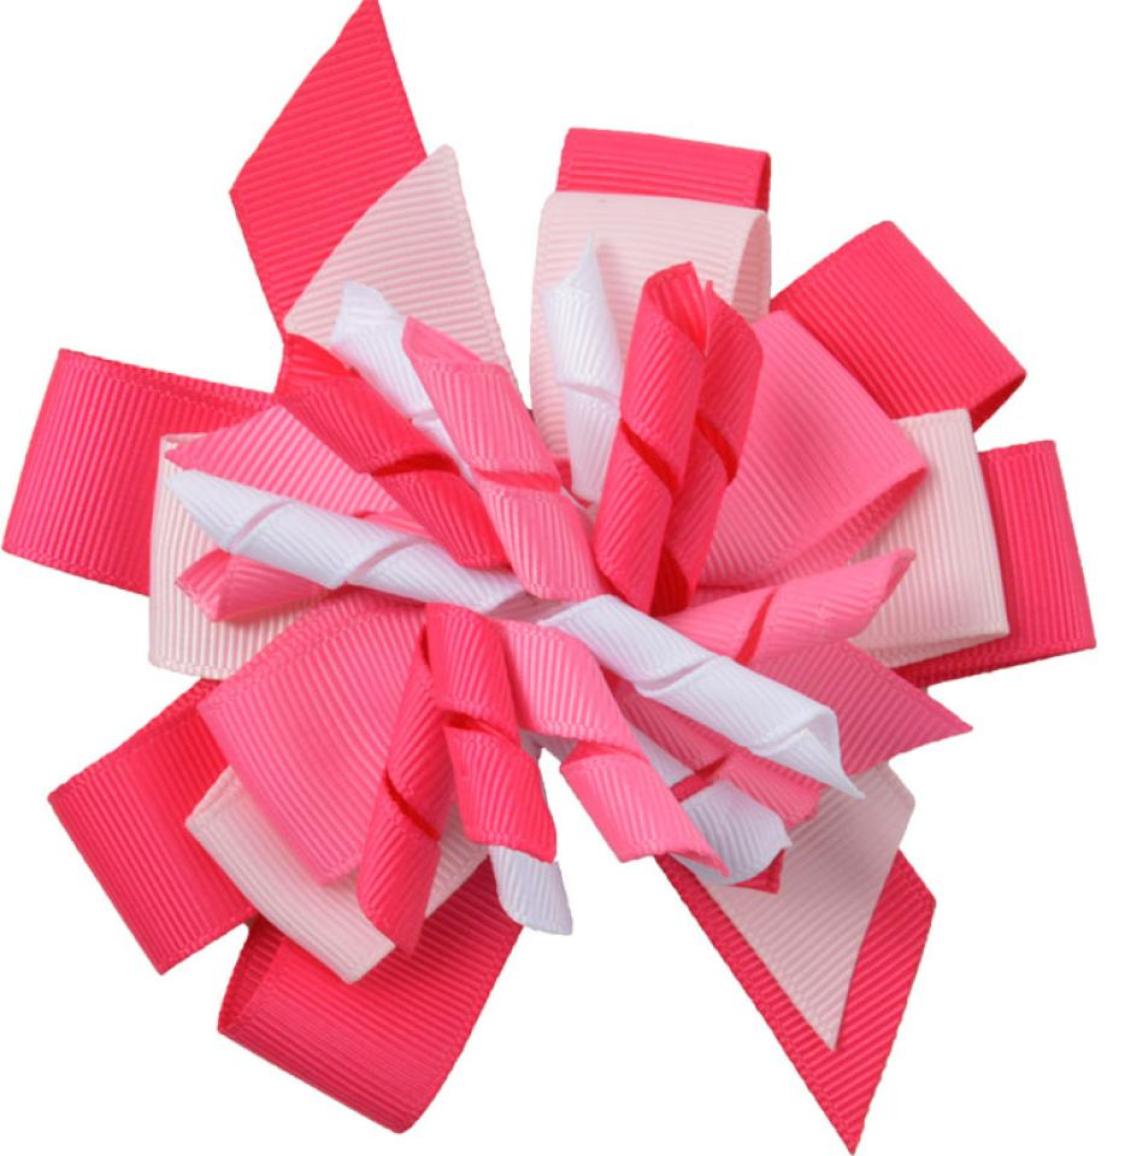 

Girl M2MG Hairbows Layered Korker curly ribbon Hair Bows clips Boutique Kids corker Hair bands Hairclips Headwear accessories PD016087392, Multi-color